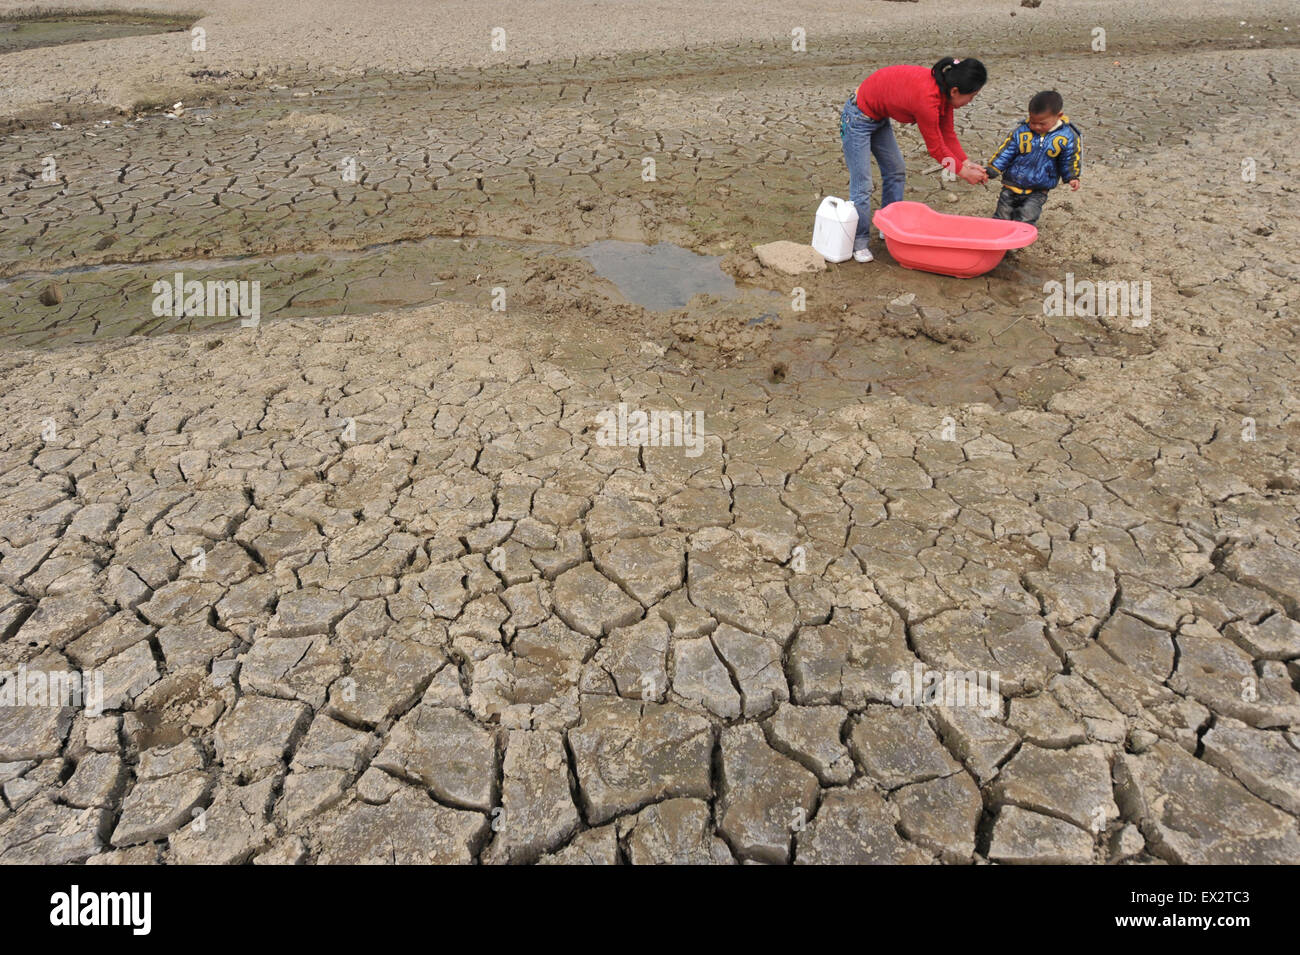 A boy carries a container as he stands on a partially dried-up reservoir in Kaiyang county, Guizhou province, March 16, 2010. A Stock Photo